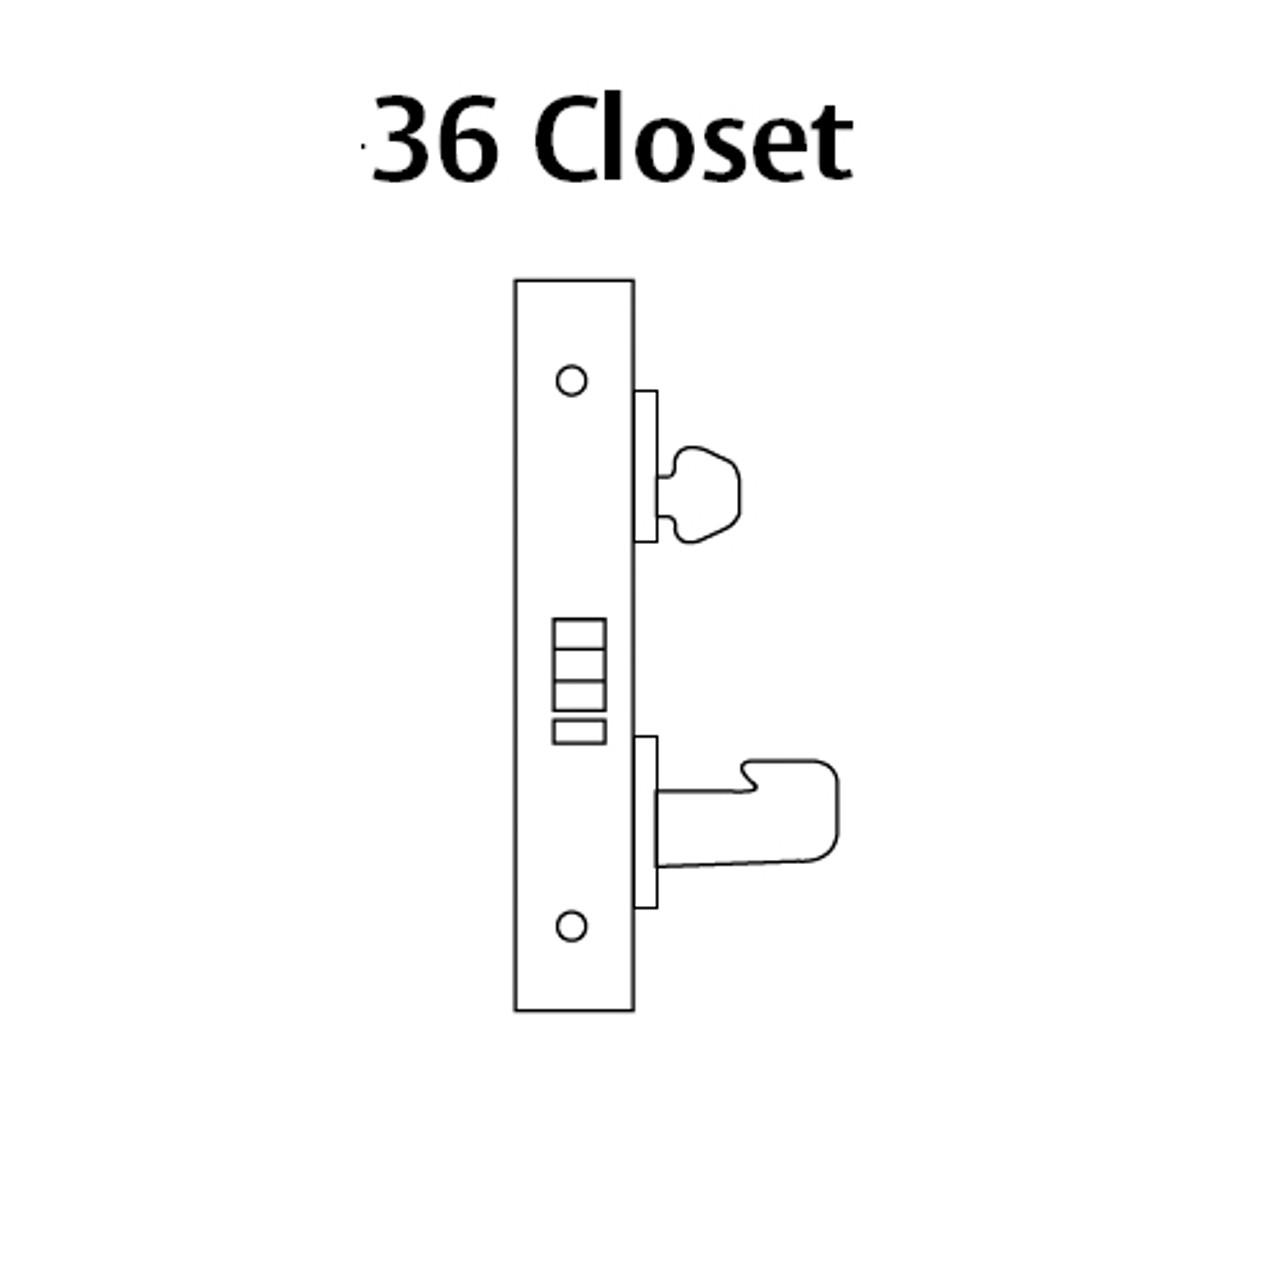 LC-8236-LNW-26D Sargent 8200 Series Closet Mortise Lock with LNW Lever Trim Less Cylinder in Satin Chrome